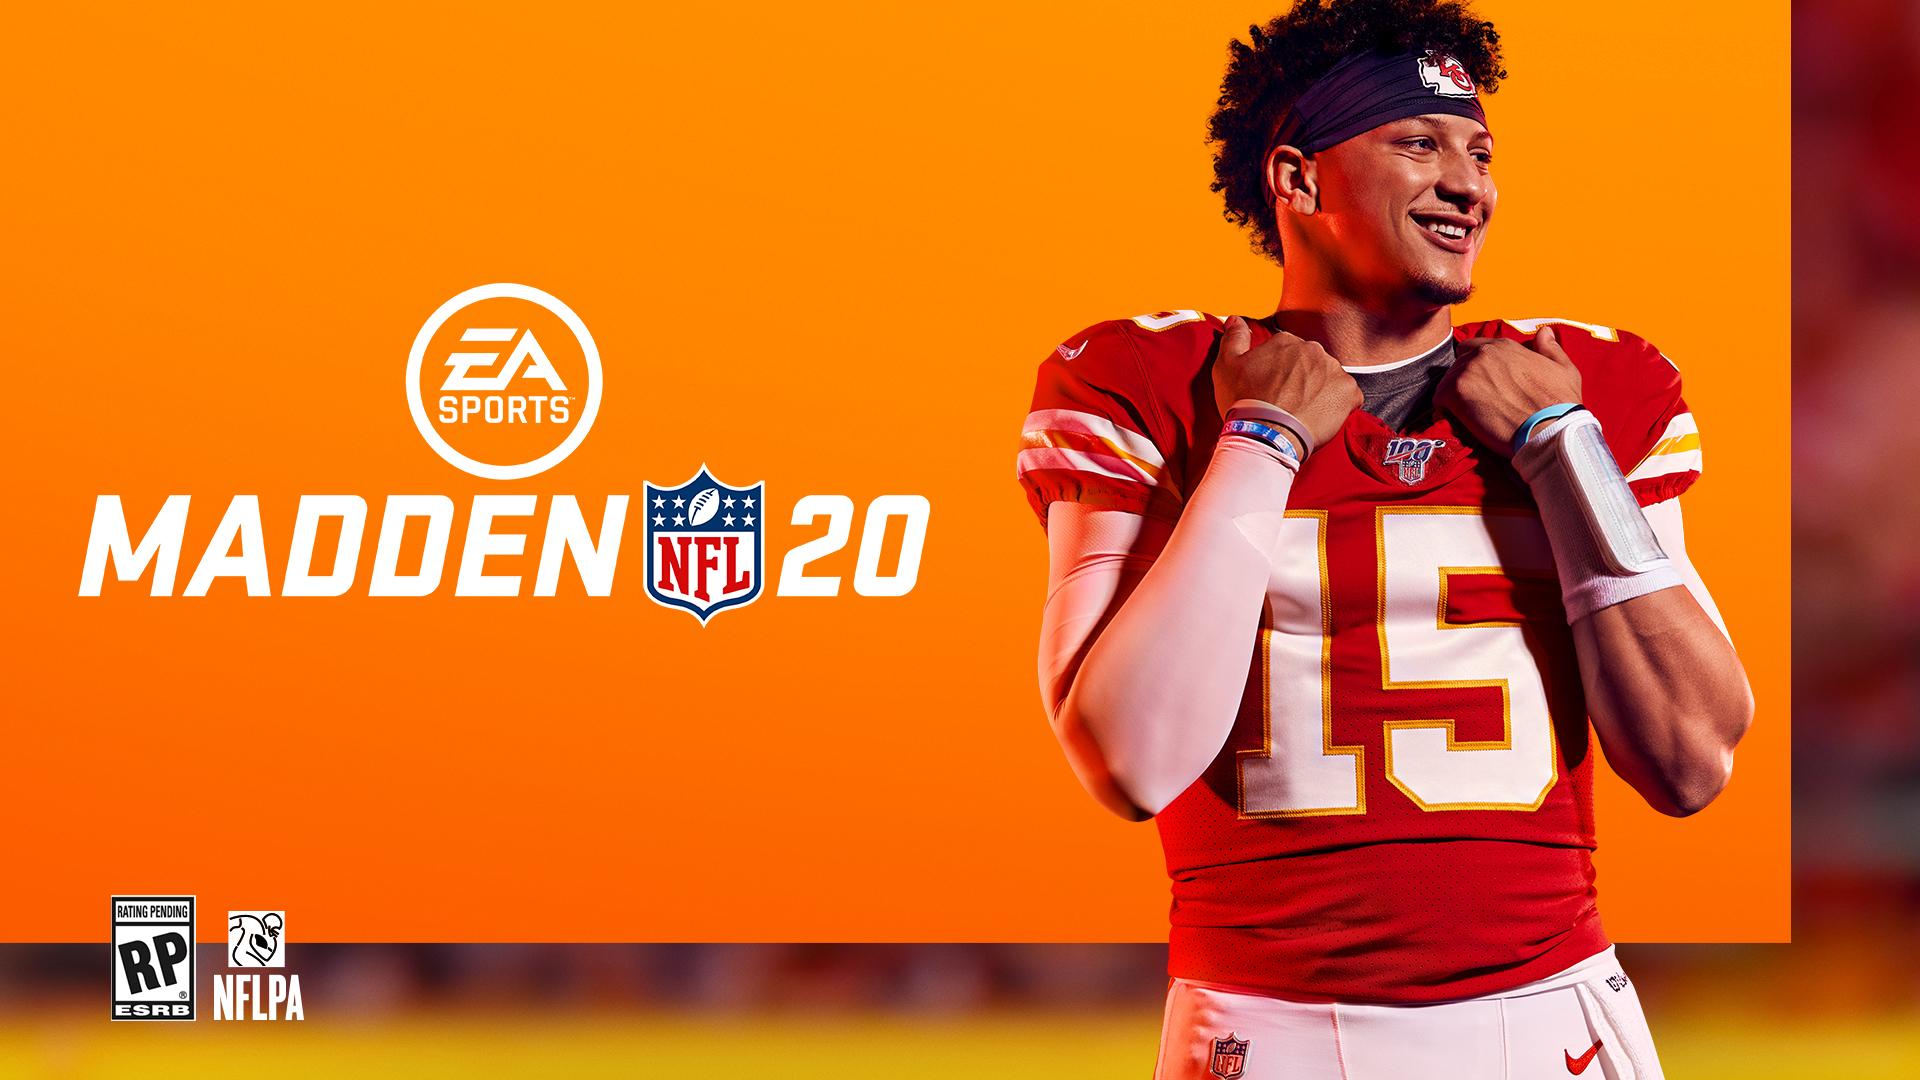 madden nfl 20 for ps3